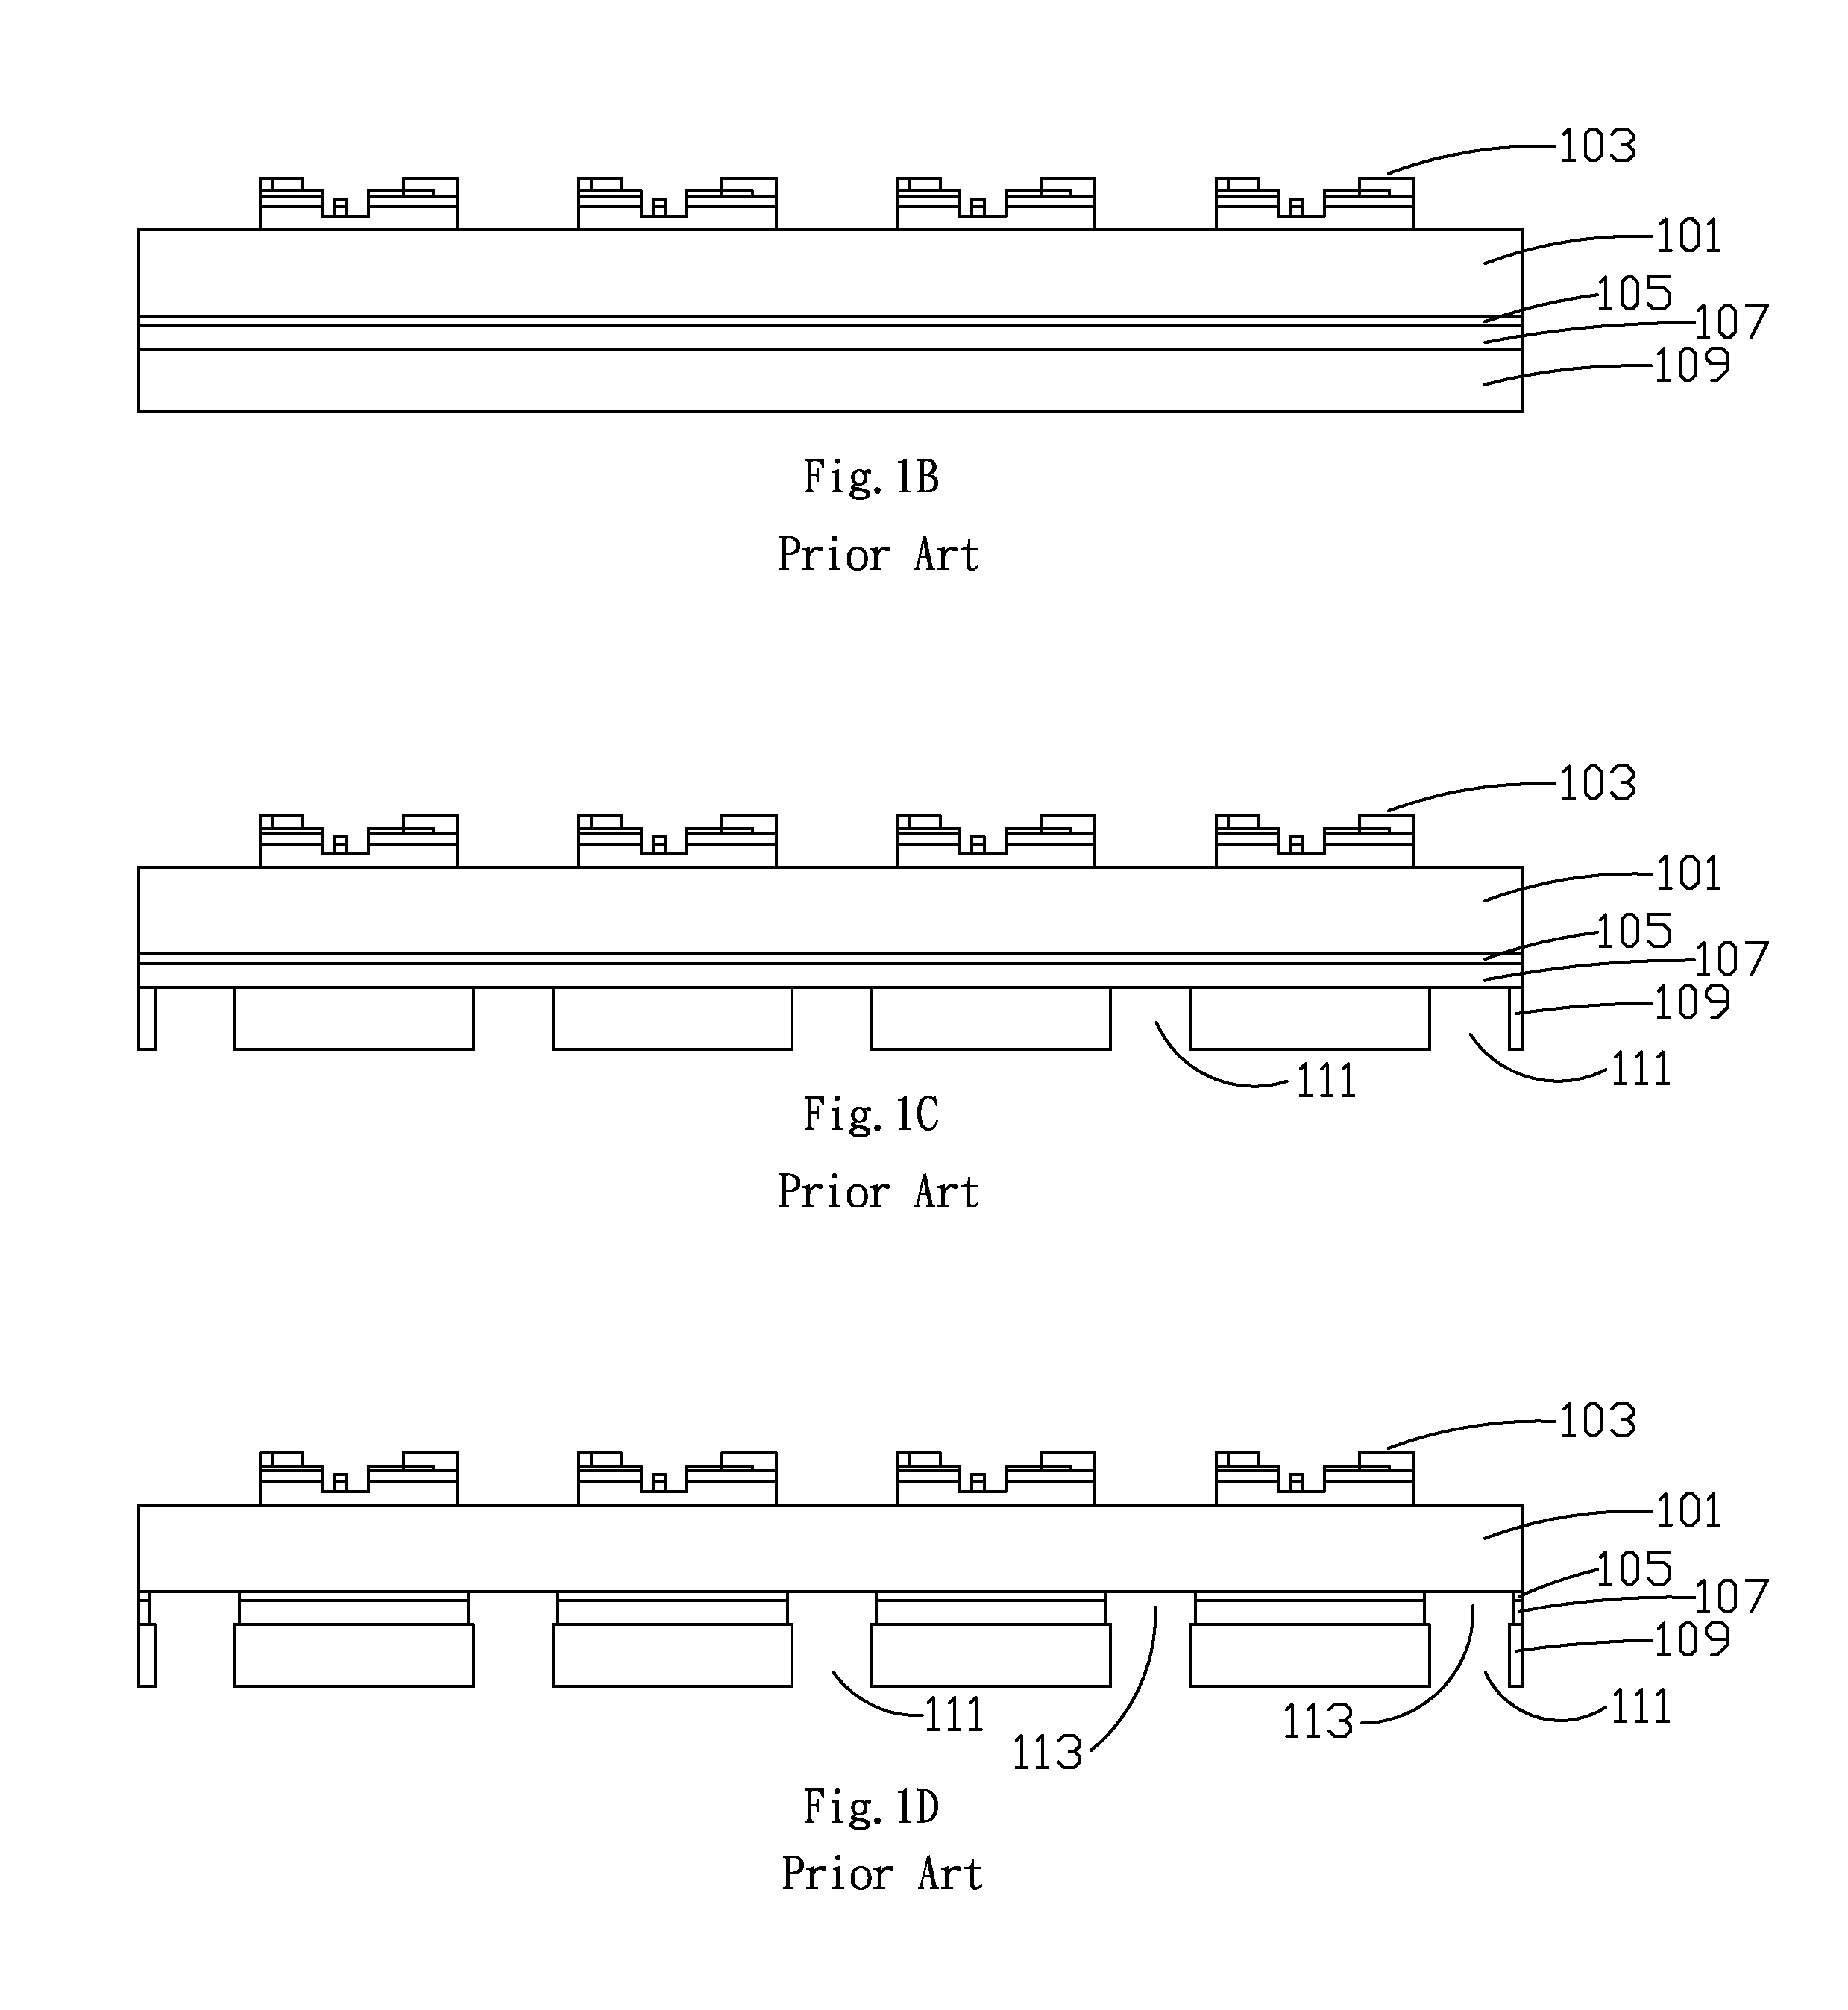 Fabrication method for producing semiconductor chips with enhanced die strength